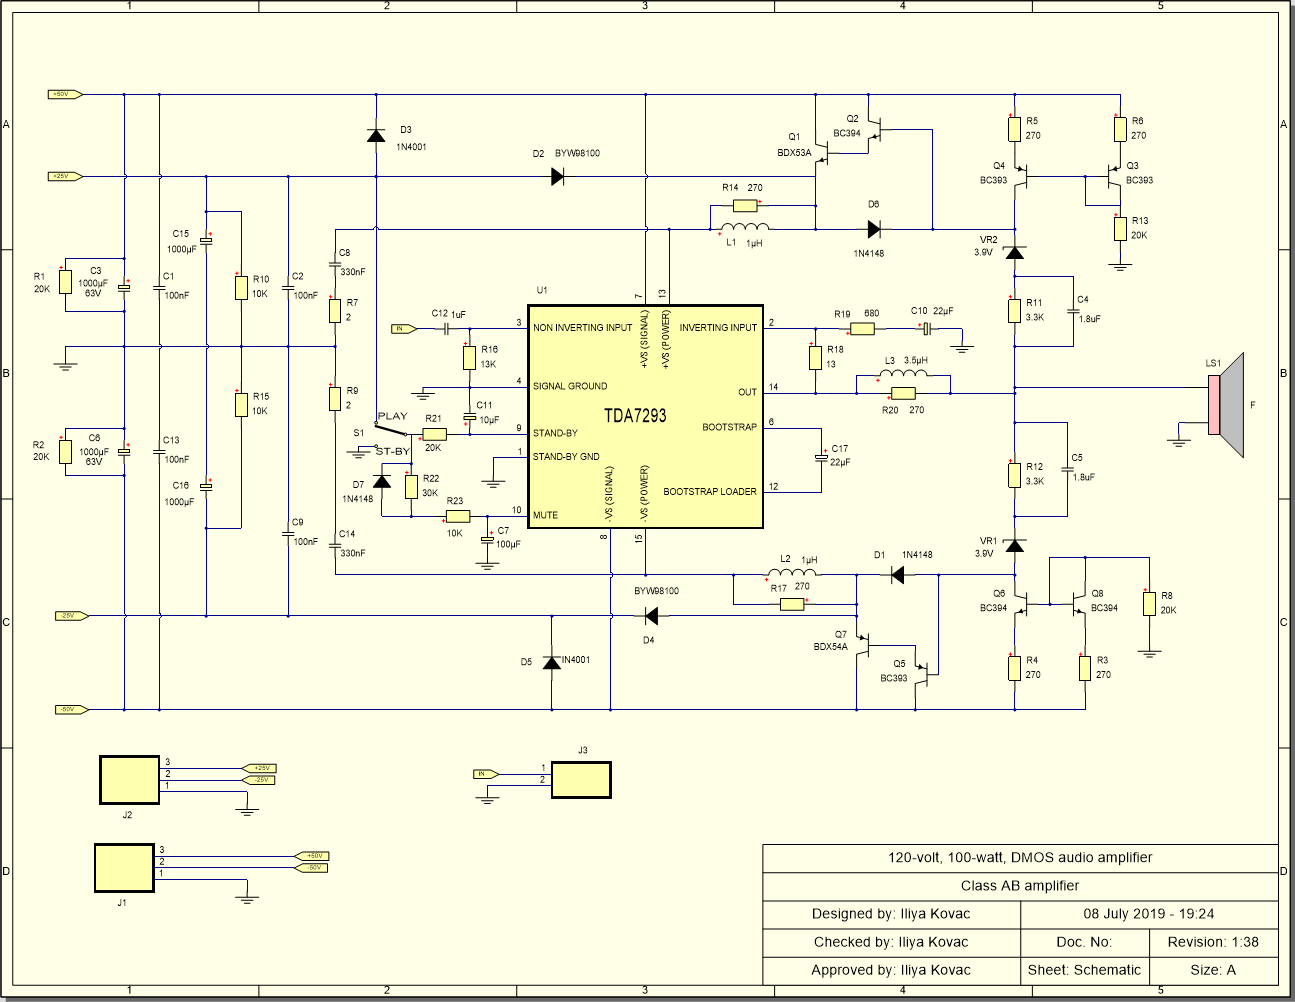 The Main Schematic for the Amplifier